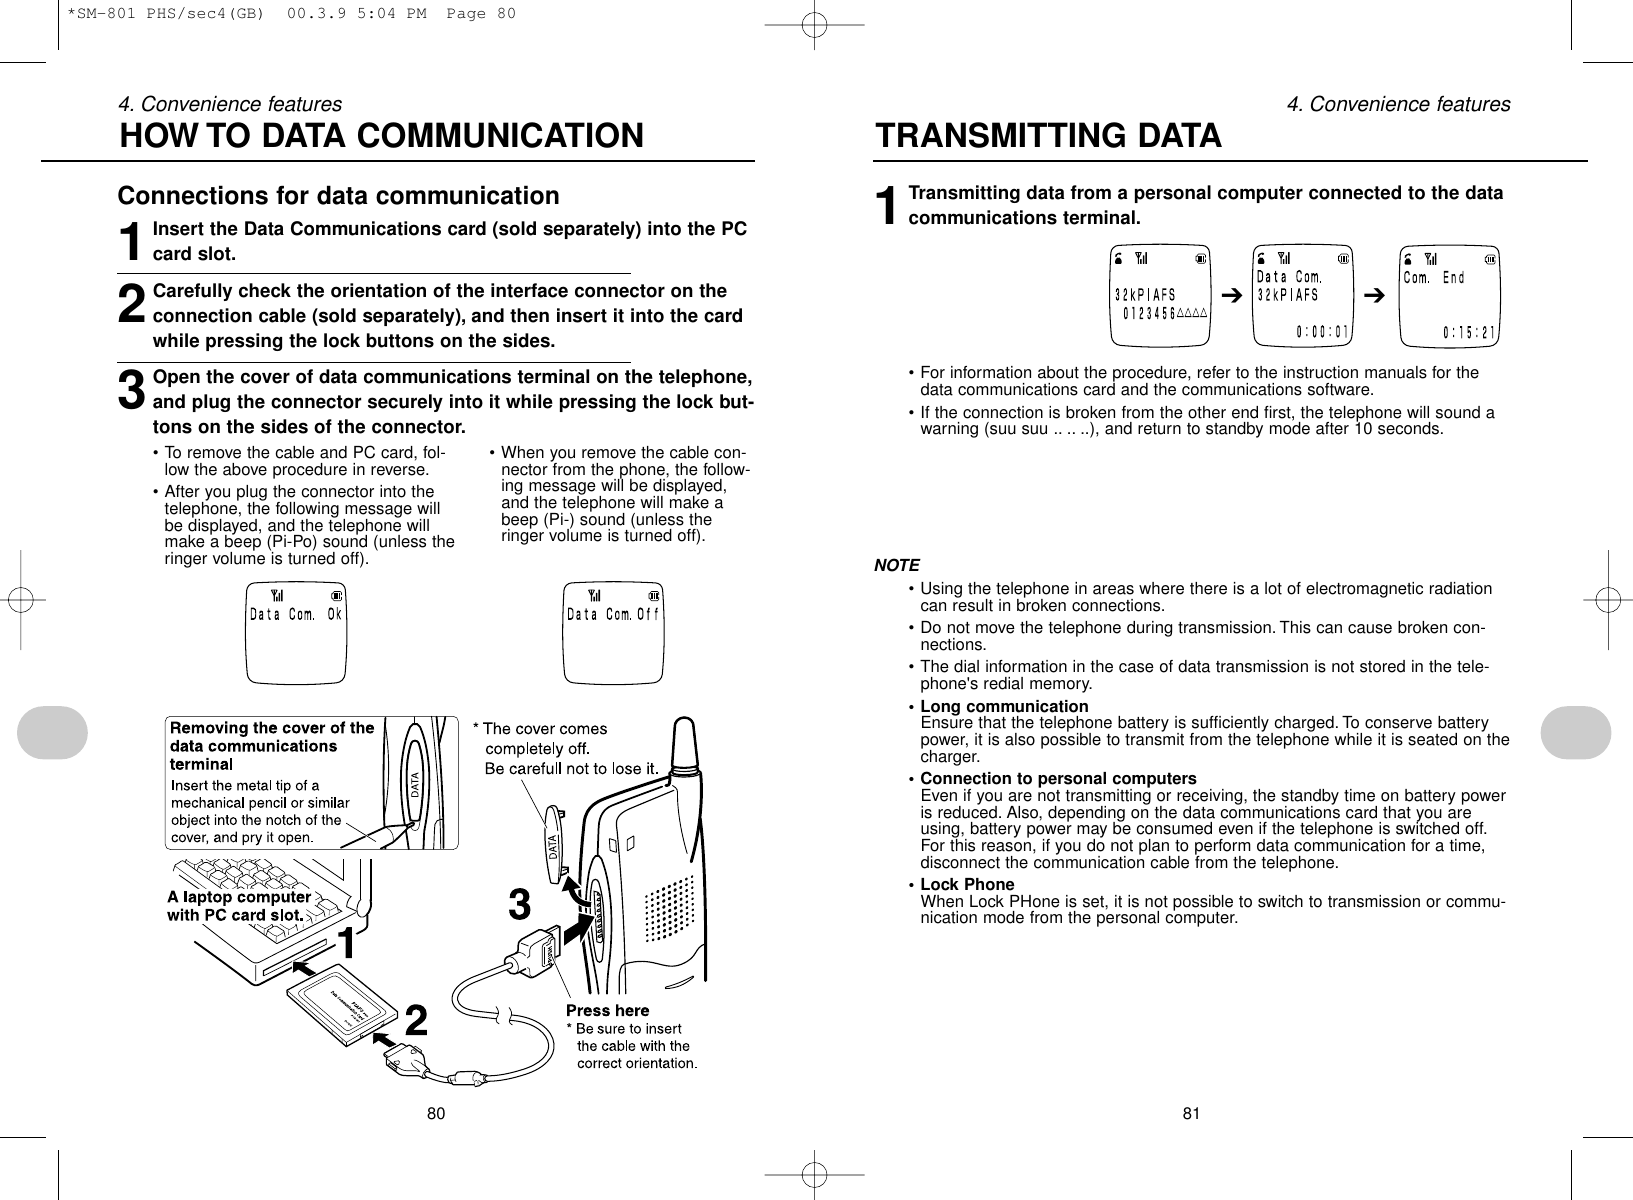 80 814. Convenience features 4. Convenience featuresConnections for data communication1Insert the Data Communications card (sold separately) into the PCcard slot.2Carefully check the orientation of the interface connector on theconnection cable (sold separately), and then insert it into the cardwhile pressing the lock buttons on the sides.3Open the cover of data communications terminal on the telephone,and plug the connector securely into it while pressing the lock but-tons on the sides of the connector.1Transmitting data from a personal computer connected to the datacommunications terminal.• For information about the procedure, refer to the instruction manuals for thedata communications card and the communications software.• If the connection is broken from the other end first, the telephone will sound awarning (suu suu .. .. ..), and return to standby mode after 10 seconds.NOTE• Using the telephone in areas where there is a lot of electromagnetic radiationcan result in broken connections.• Do not move the telephone during transmission. This can cause broken con-nections.• The dial information in the case of data transmission is not stored in the tele-phone&apos;s redial memory.• Long communicationEnsure that the telephone battery is sufficiently charged. To conserve batterypower, it is also possible to transmit from the telephone while it is seated on thecharger.• Connection to personal computersEven if you are not transmitting or receiving, the standby time on battery poweris reduced. Also, depending on the data communications card that you areusing, battery power may be consumed even if the telephone is switched off.For this reason, if you do not plan to perform data communication for a time,disconnect the communication cable from the telephone.• Lock PhoneWhen Lock PHone is set, it is not possible to switch to transmission or commu-nication mode from the personal computer.HOW TO DATA COMMUNICATION TRANSMITTING DATA• To remove the cable and PC card, fol-low the above procedure in reverse.• After you plug the connector into thetelephone, the following message willbe displayed, and the telephone willmake a beep (Pi-Po) sound (unless theringer volume is turned off).• When you remove the cable con-nector from the phone, the follow-ing message will be displayed,and the telephone will make abeep (Pi-) sound (unless theringer volume is turned off).➔➔*SM-801 PHS/sec4(GB)  00.3.9 5:04 PM  Page 80